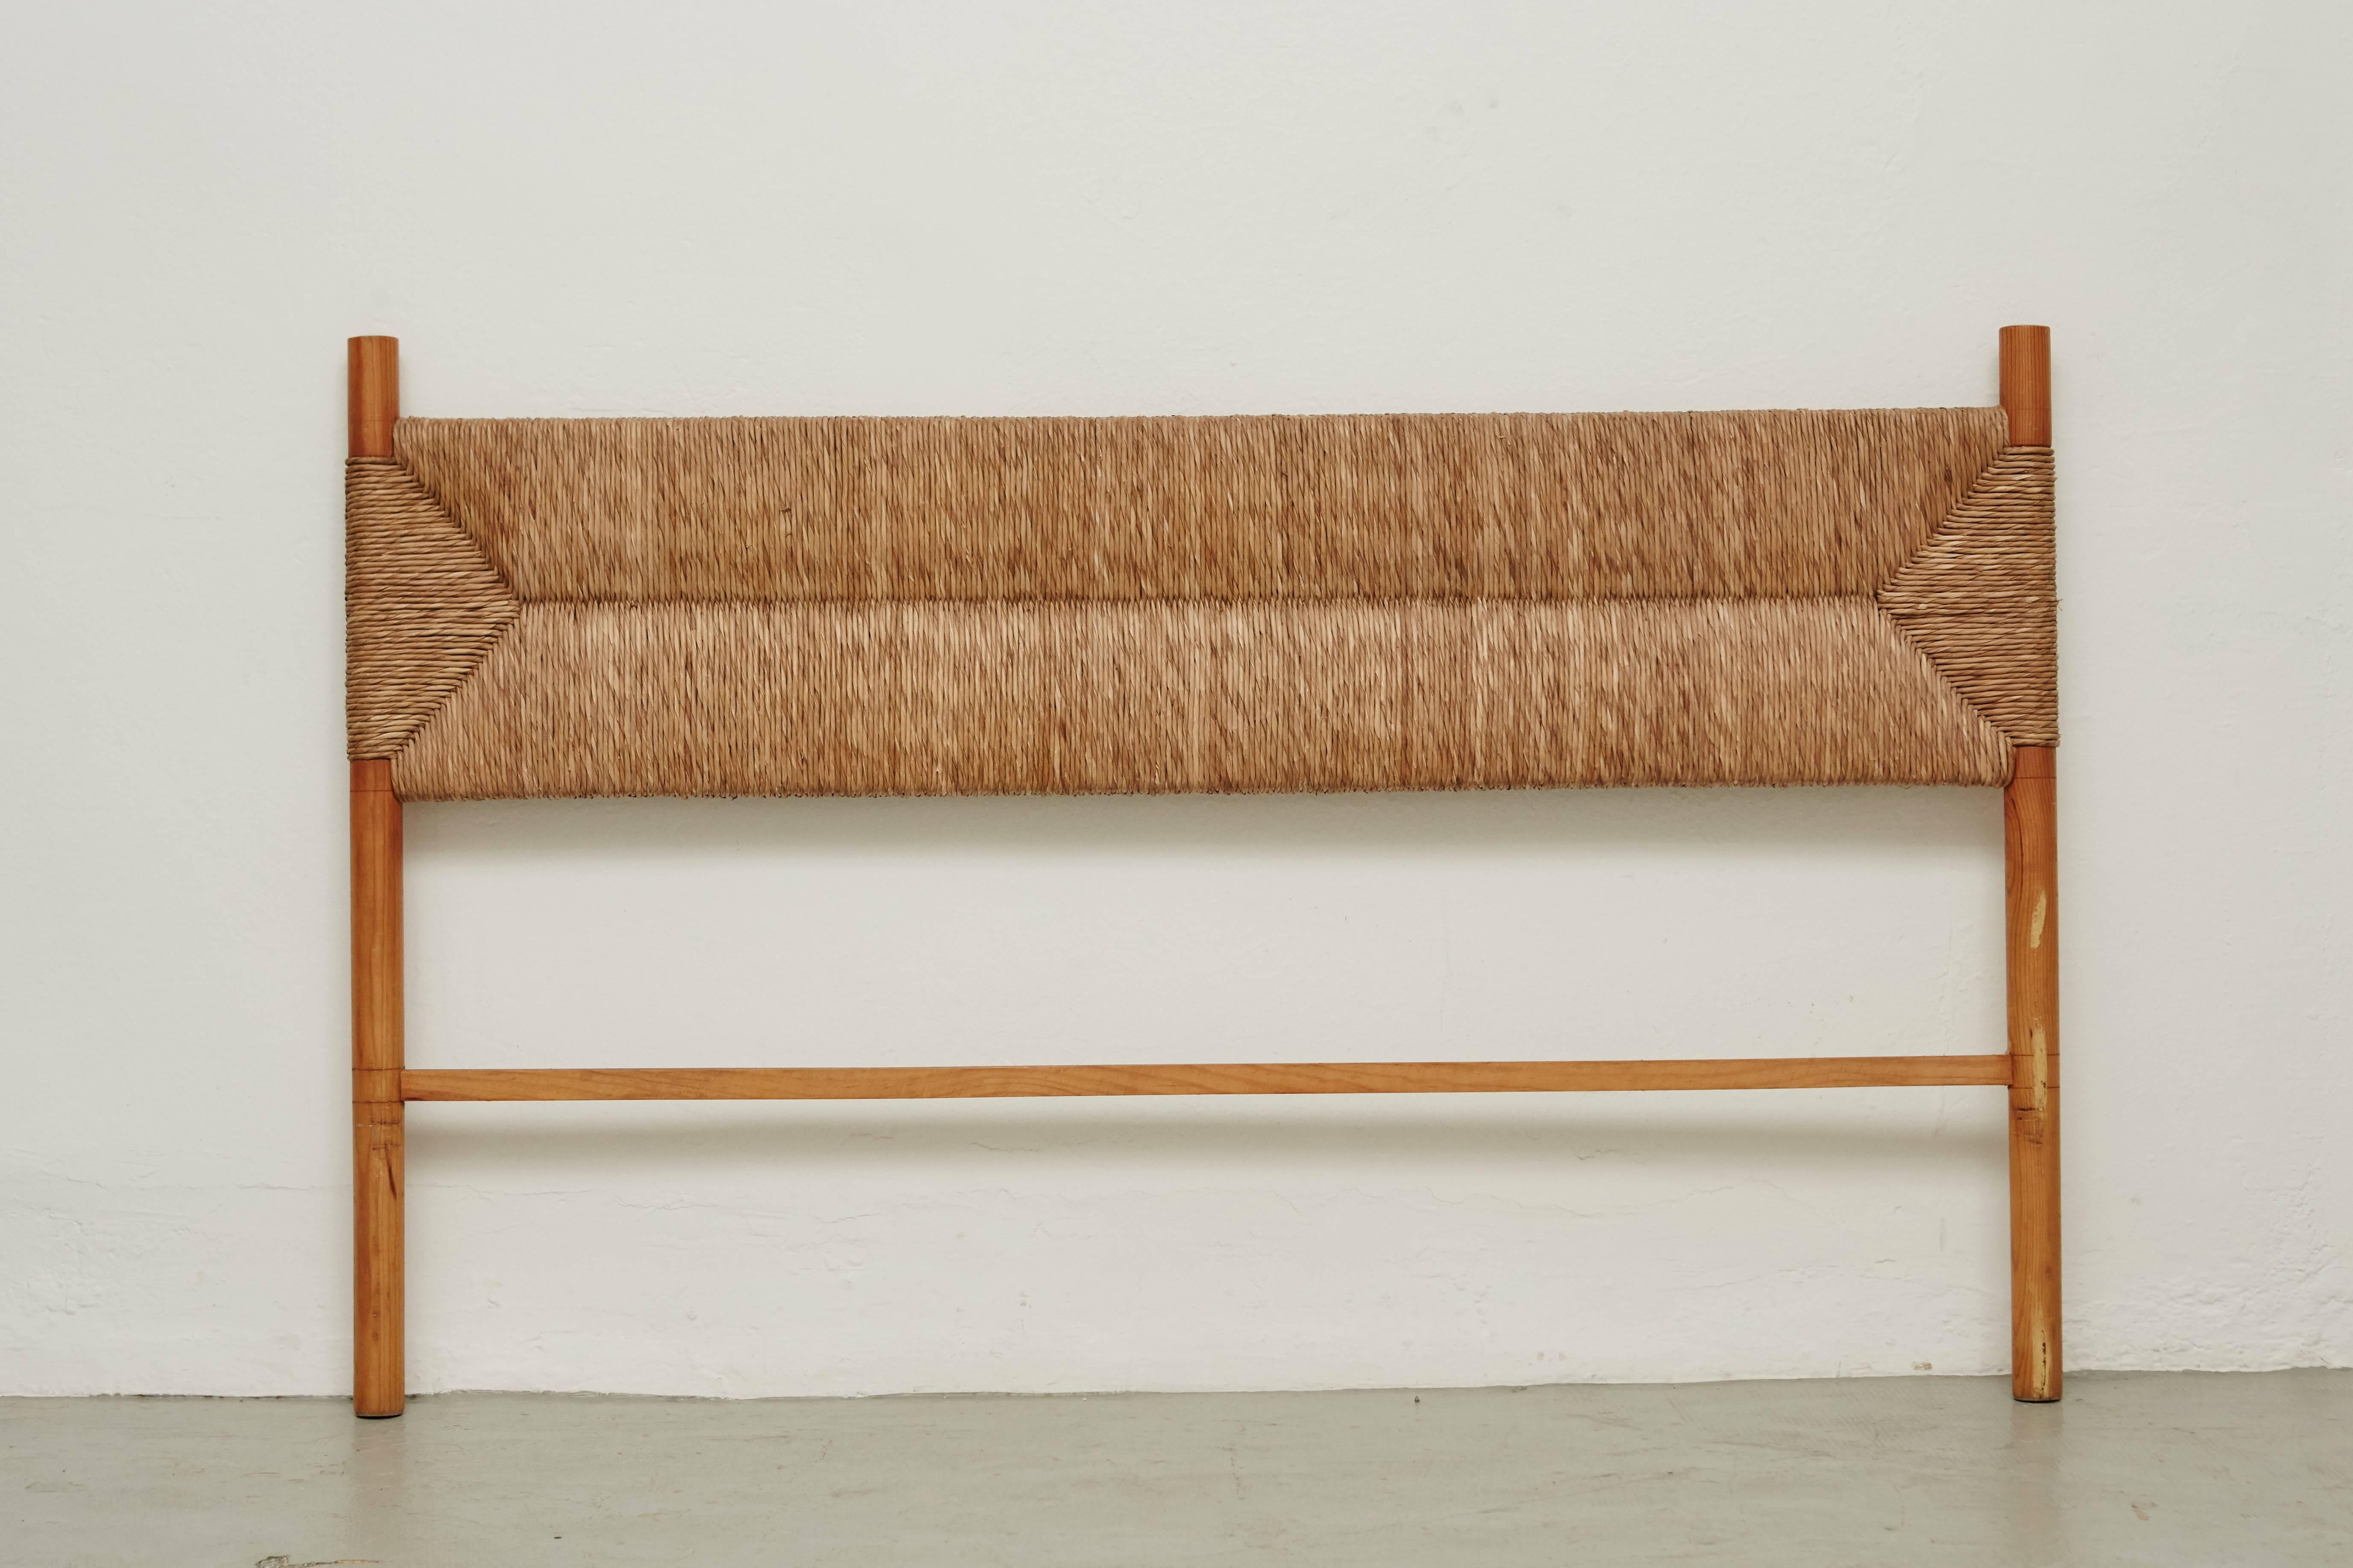 Headboard designed in the style of Charlotte Perriand, made by unknown manufacturer.

Wood and rattan.

In good original condition, with minor wear consistent with age and use, preserving a beautiful patina.

Charlotte Perriand (1903-1999) she